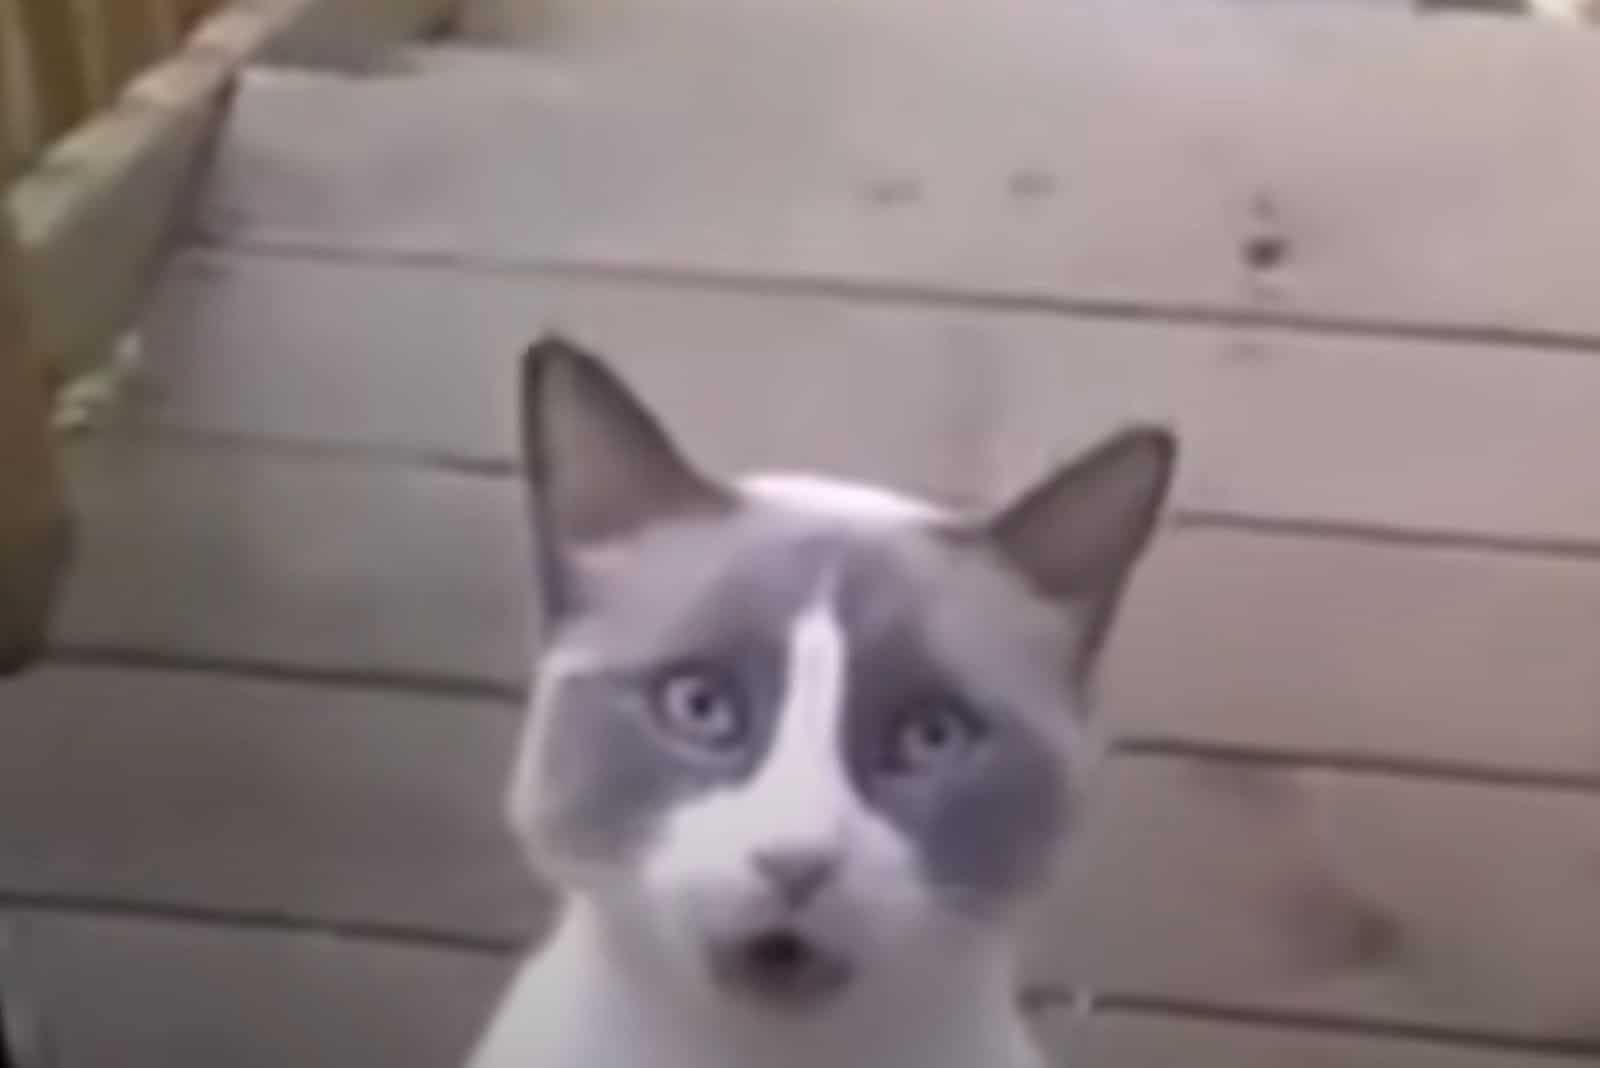 funnny cat uses growling voice in front of the door